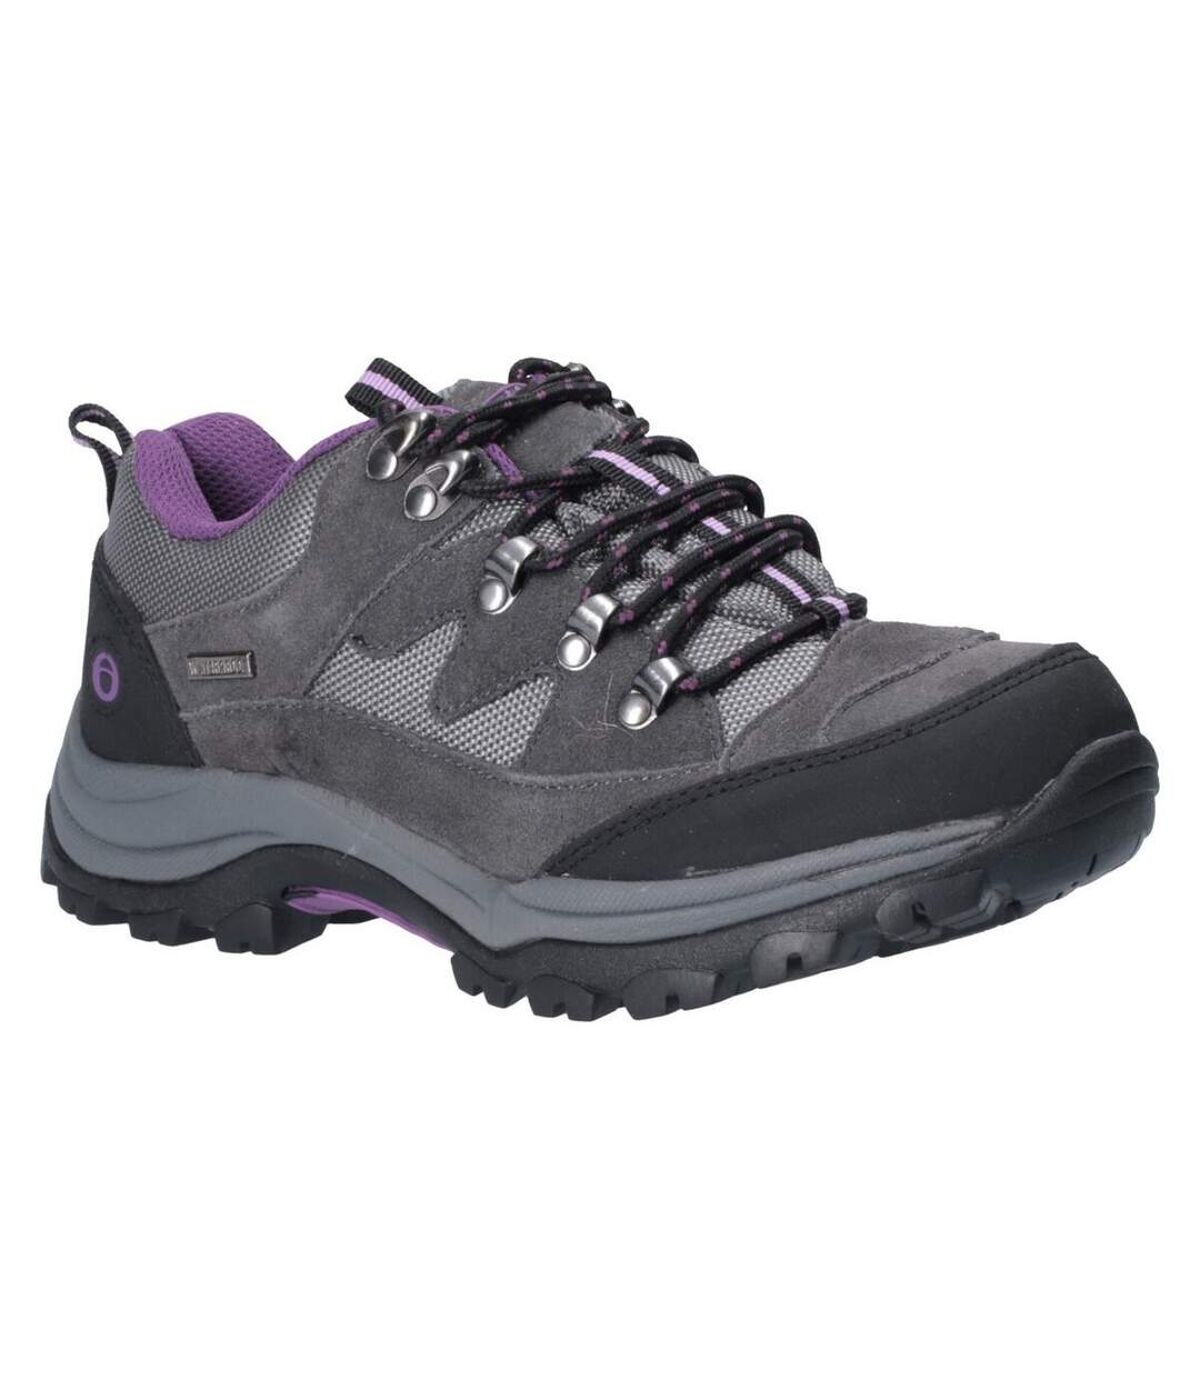 Cotswold Womens/Ladies Oxerton Leather Hiking Shoes (Grey/Purple) - UTFS5274